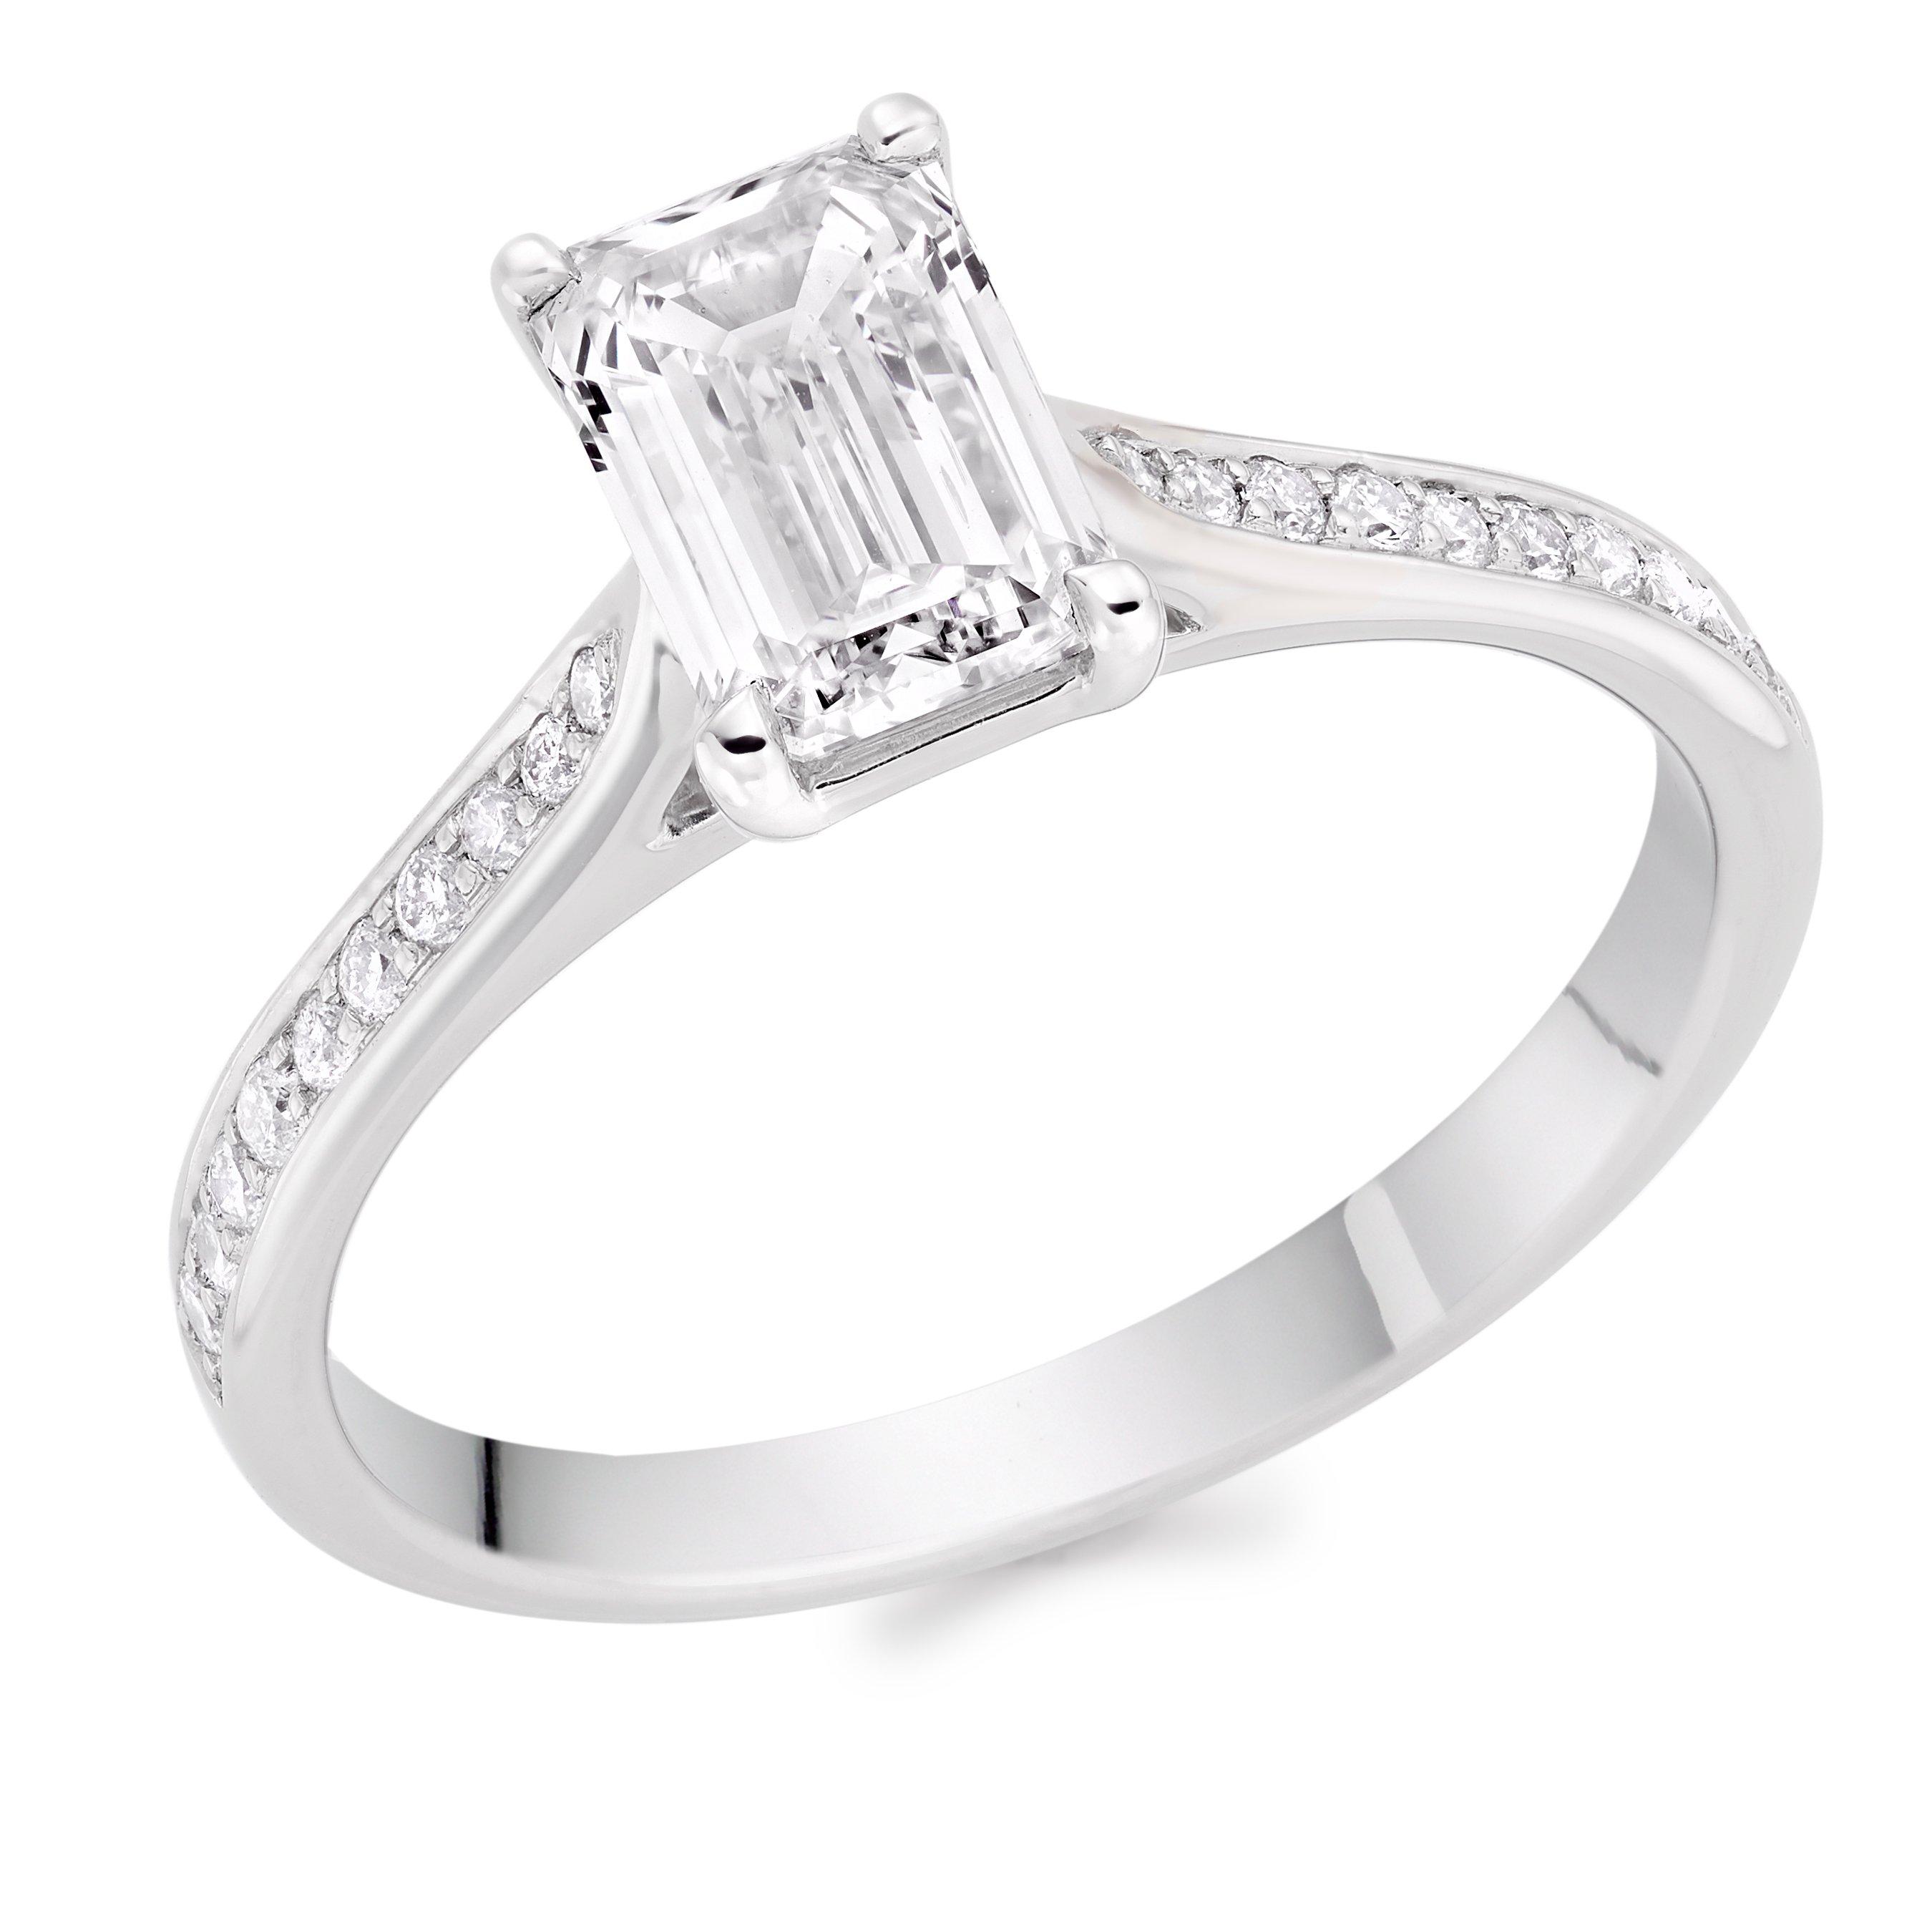 Once Platinum Diamond Solitaire Ring | 0137990 | Beaverbrooks the Jewellers